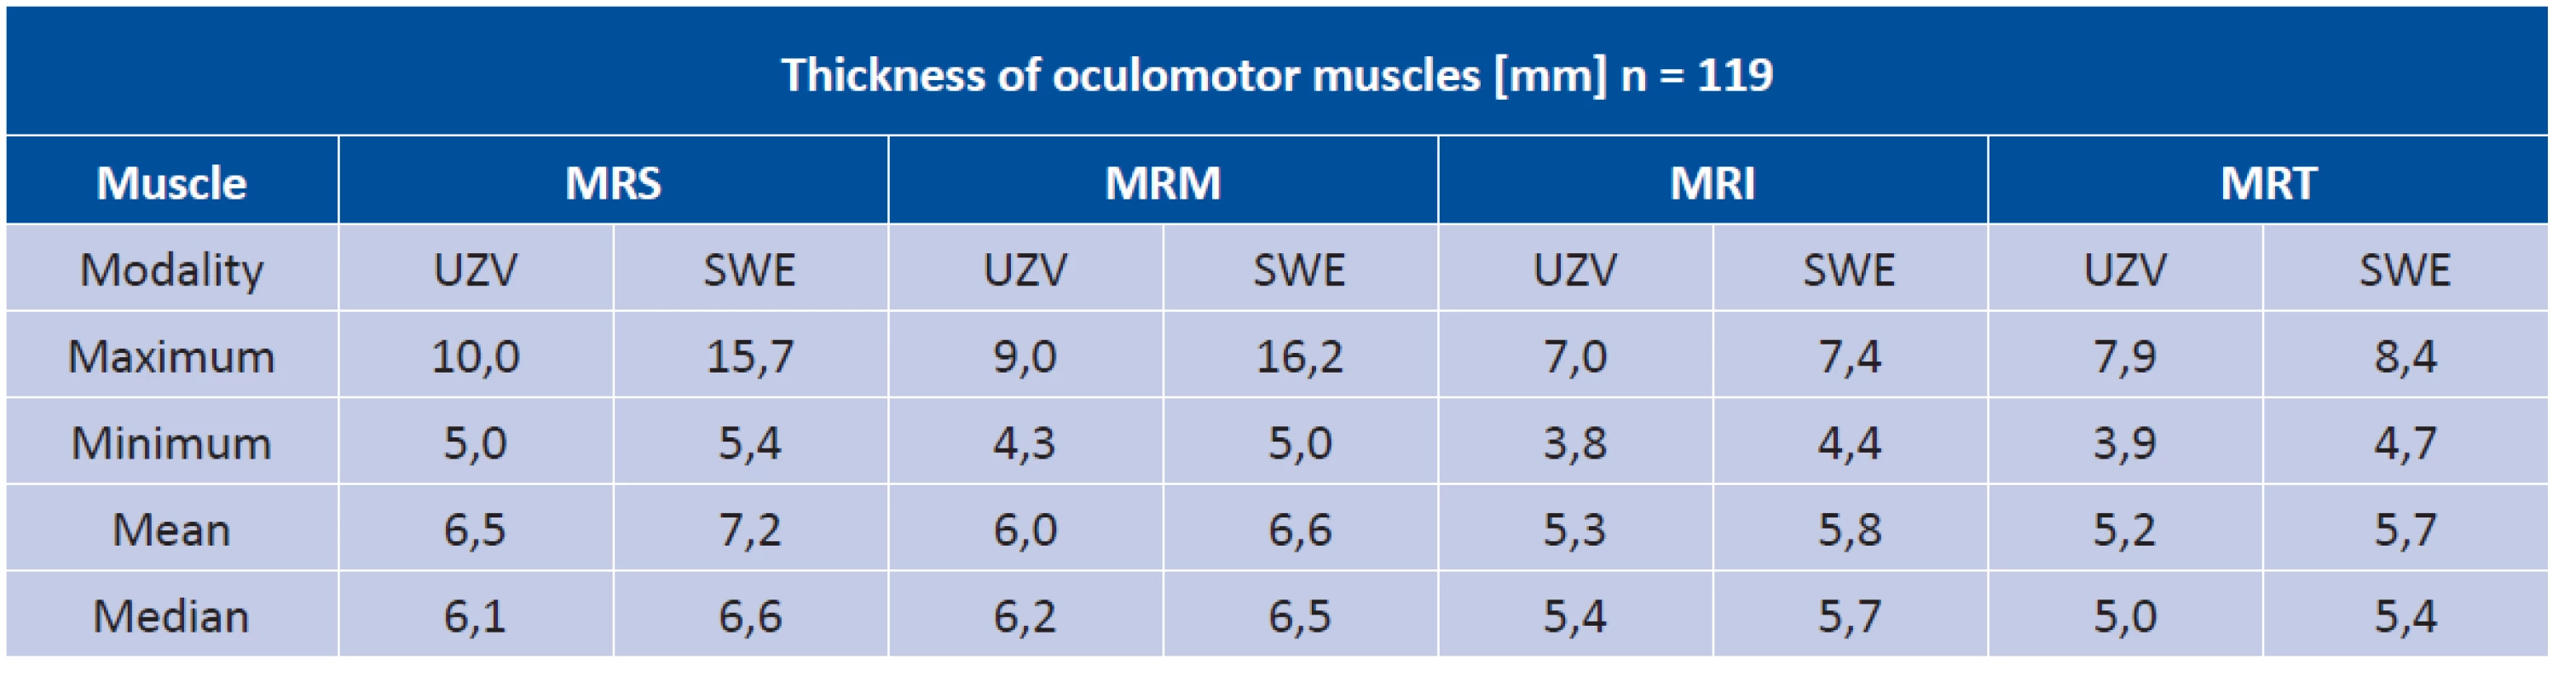 Thickness of oculomotor rectus muscles in endocrine orbitopathy - comparison of Shear Wave elastography and
ultrasonic examination